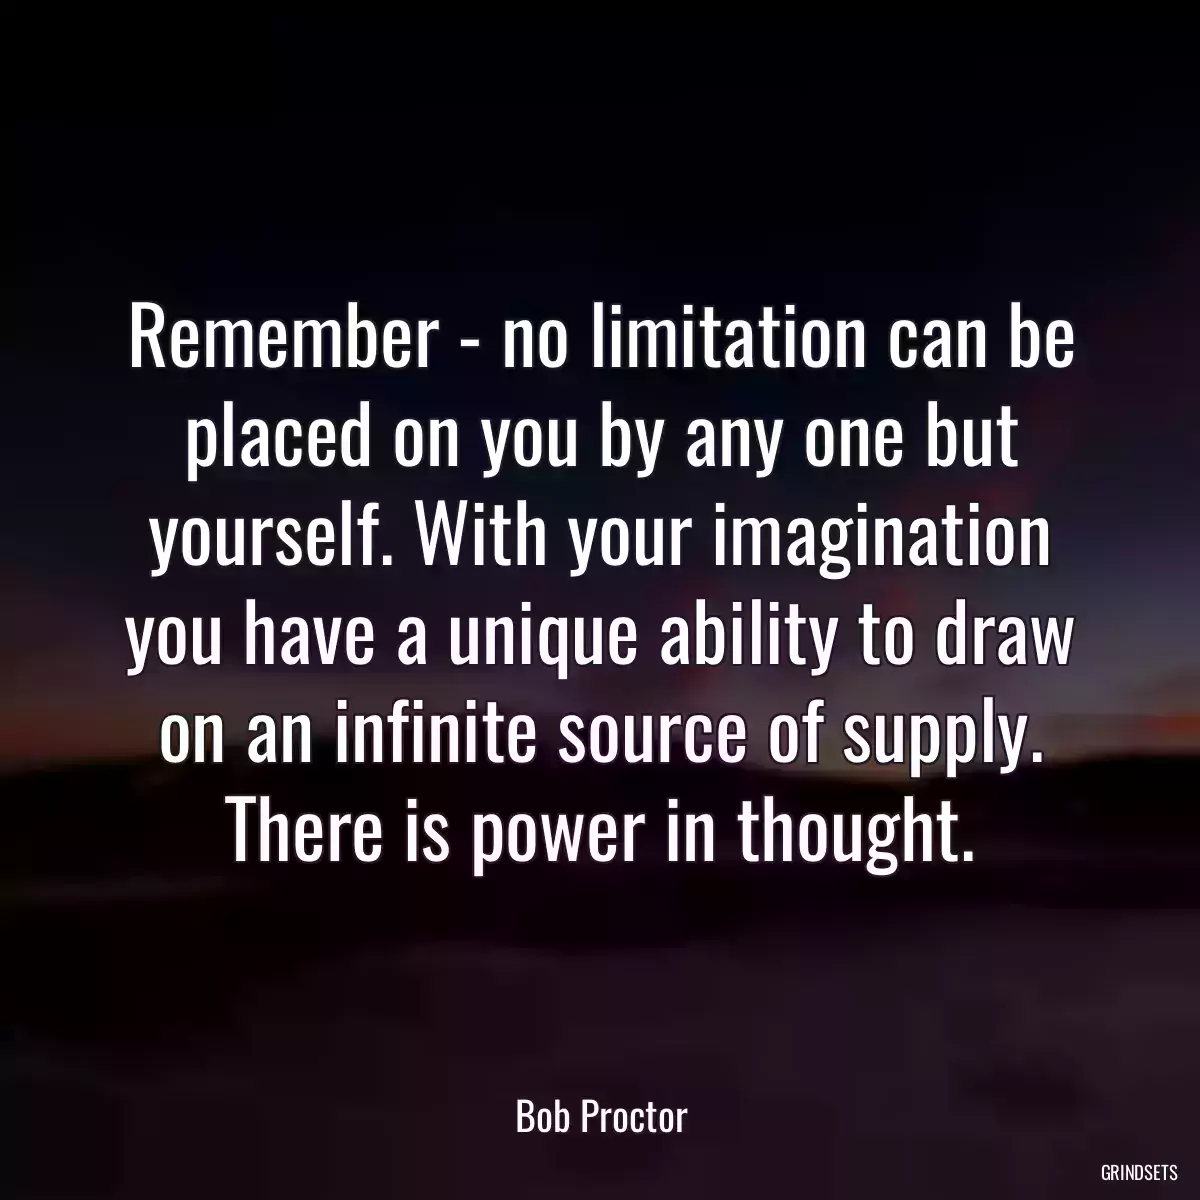 Remember - no limitation can be placed on you by any one but yourself. With your imagination you have a unique ability to draw on an infinite source of supply. There is power in thought.